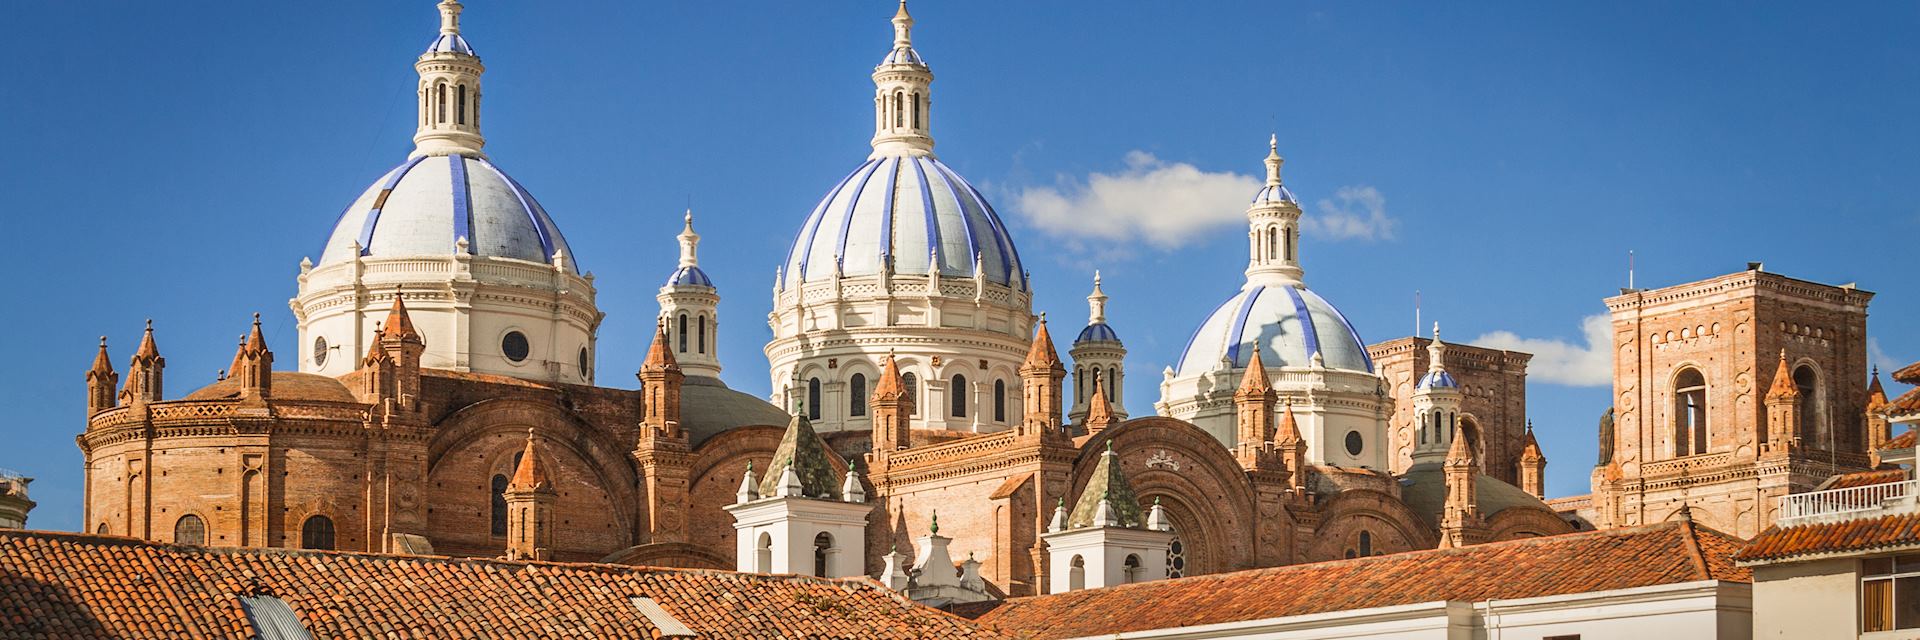 The Cathedral of the Immaculate Conception in Cuenca